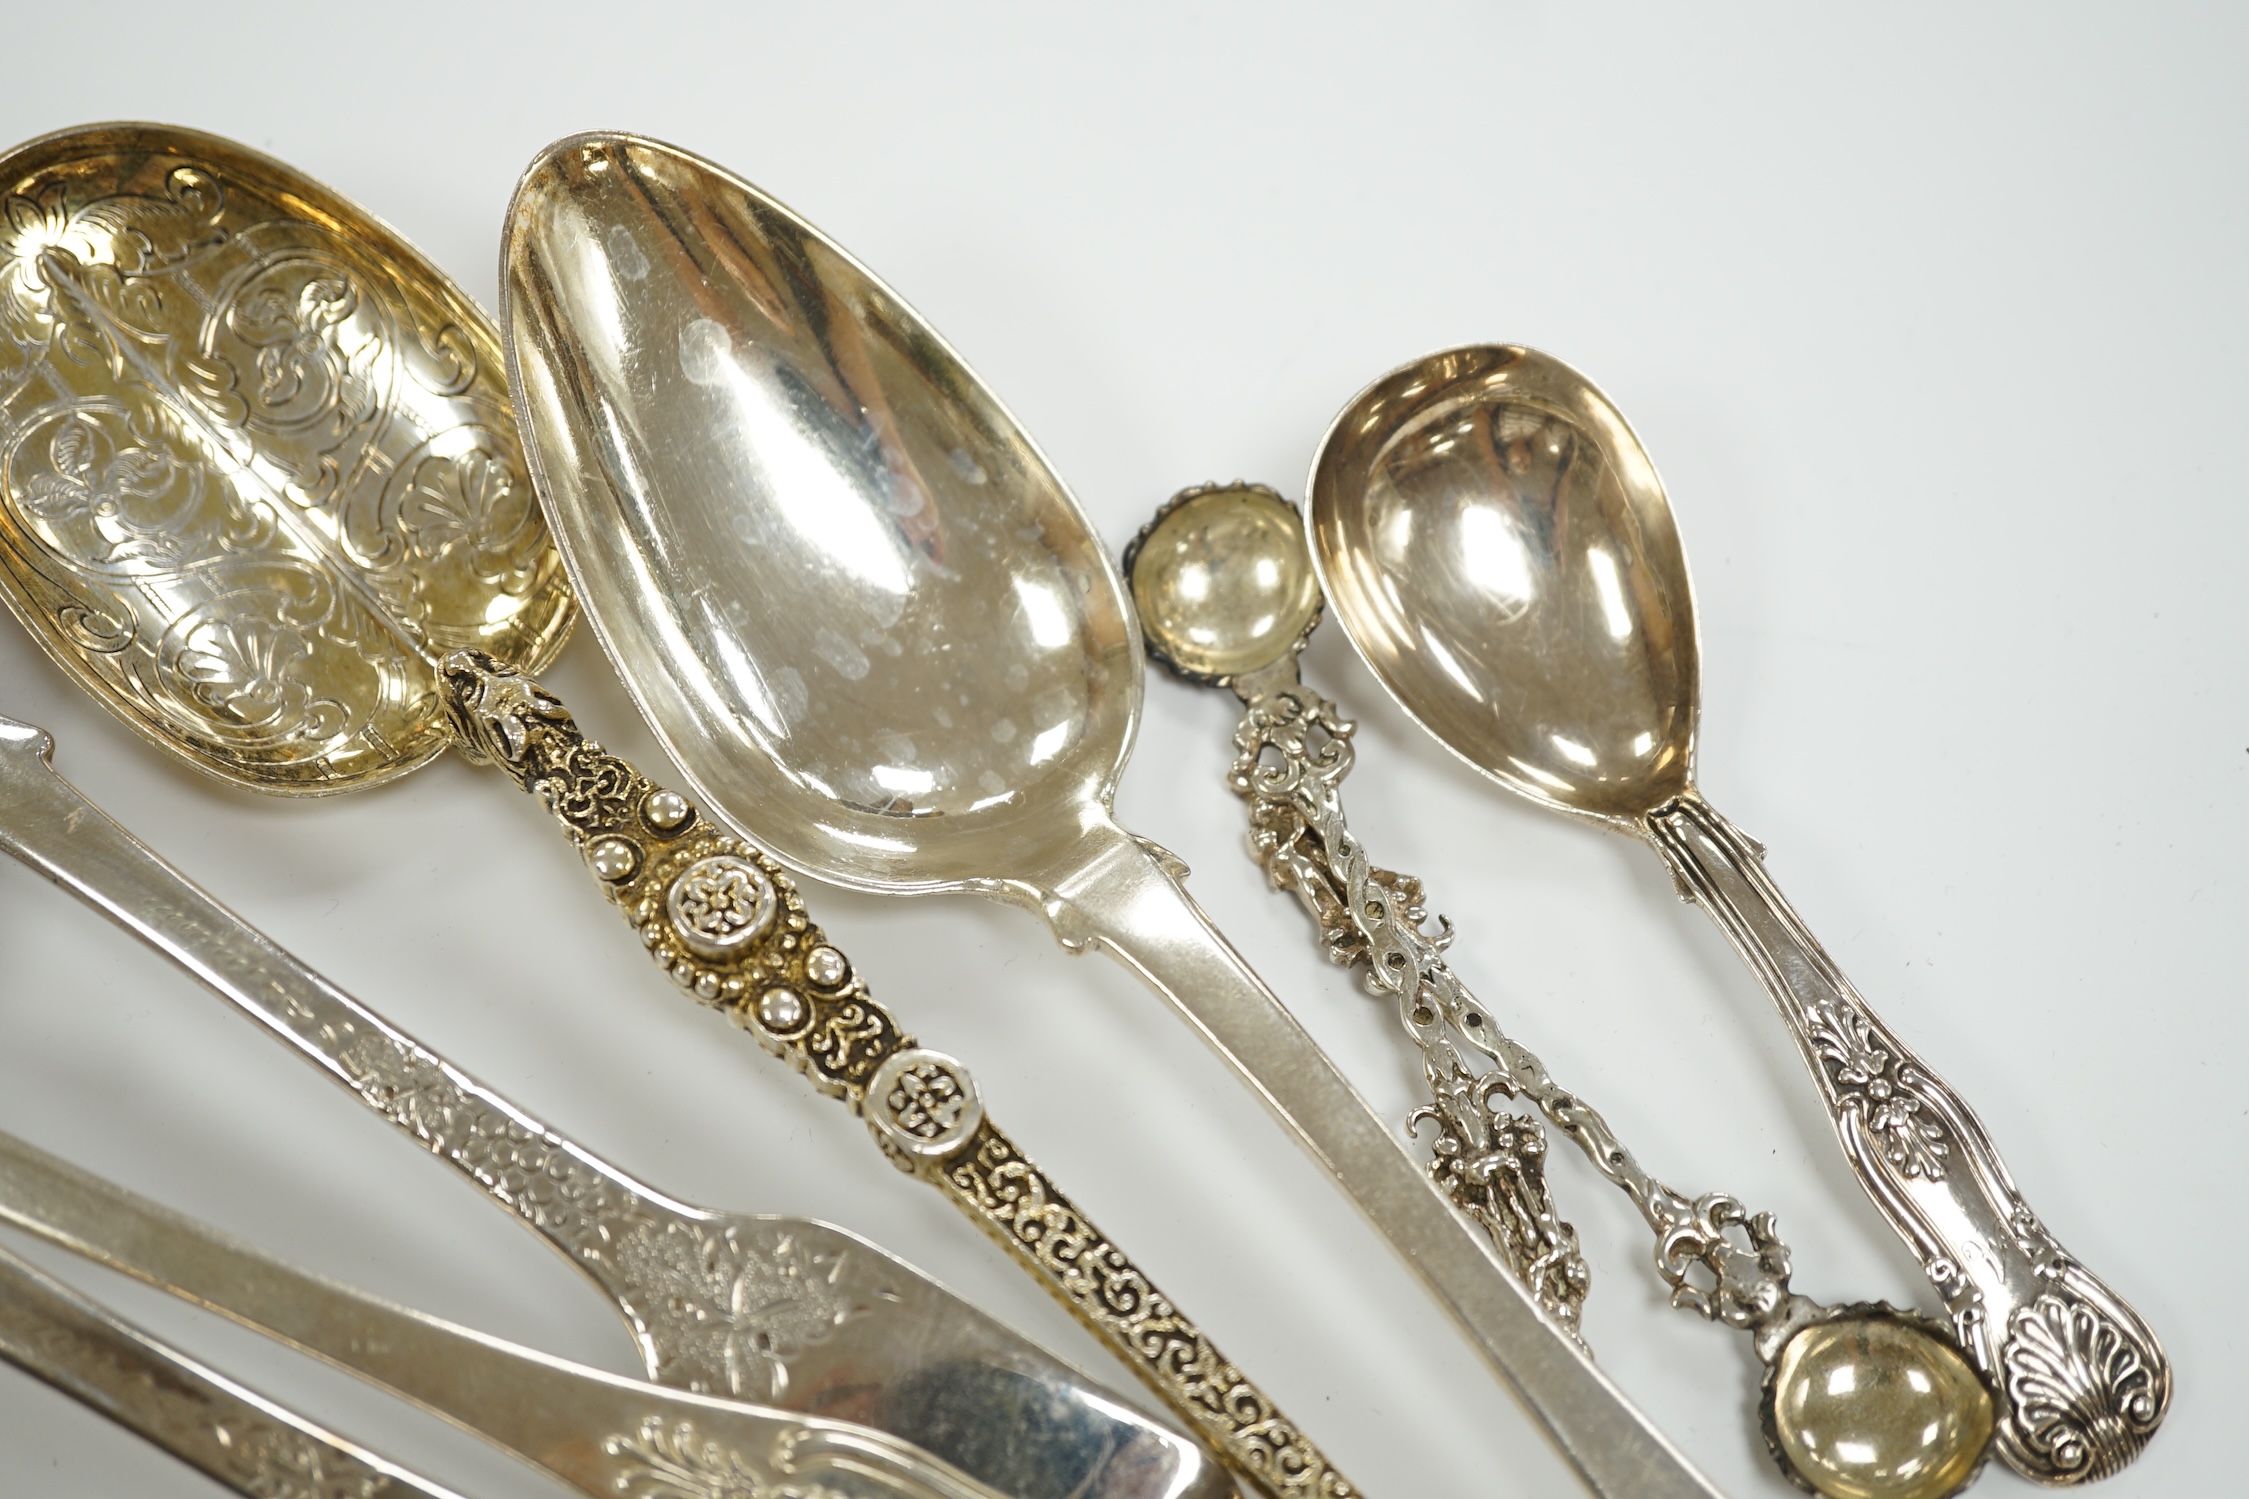 An Edwardian silver 'anointing spoon' Wakeley & Wheeler, London, 1901, 25.5cm, eight other silver spoons including two 19th century caddy spoons and a silver christening mug, 17.7oz.